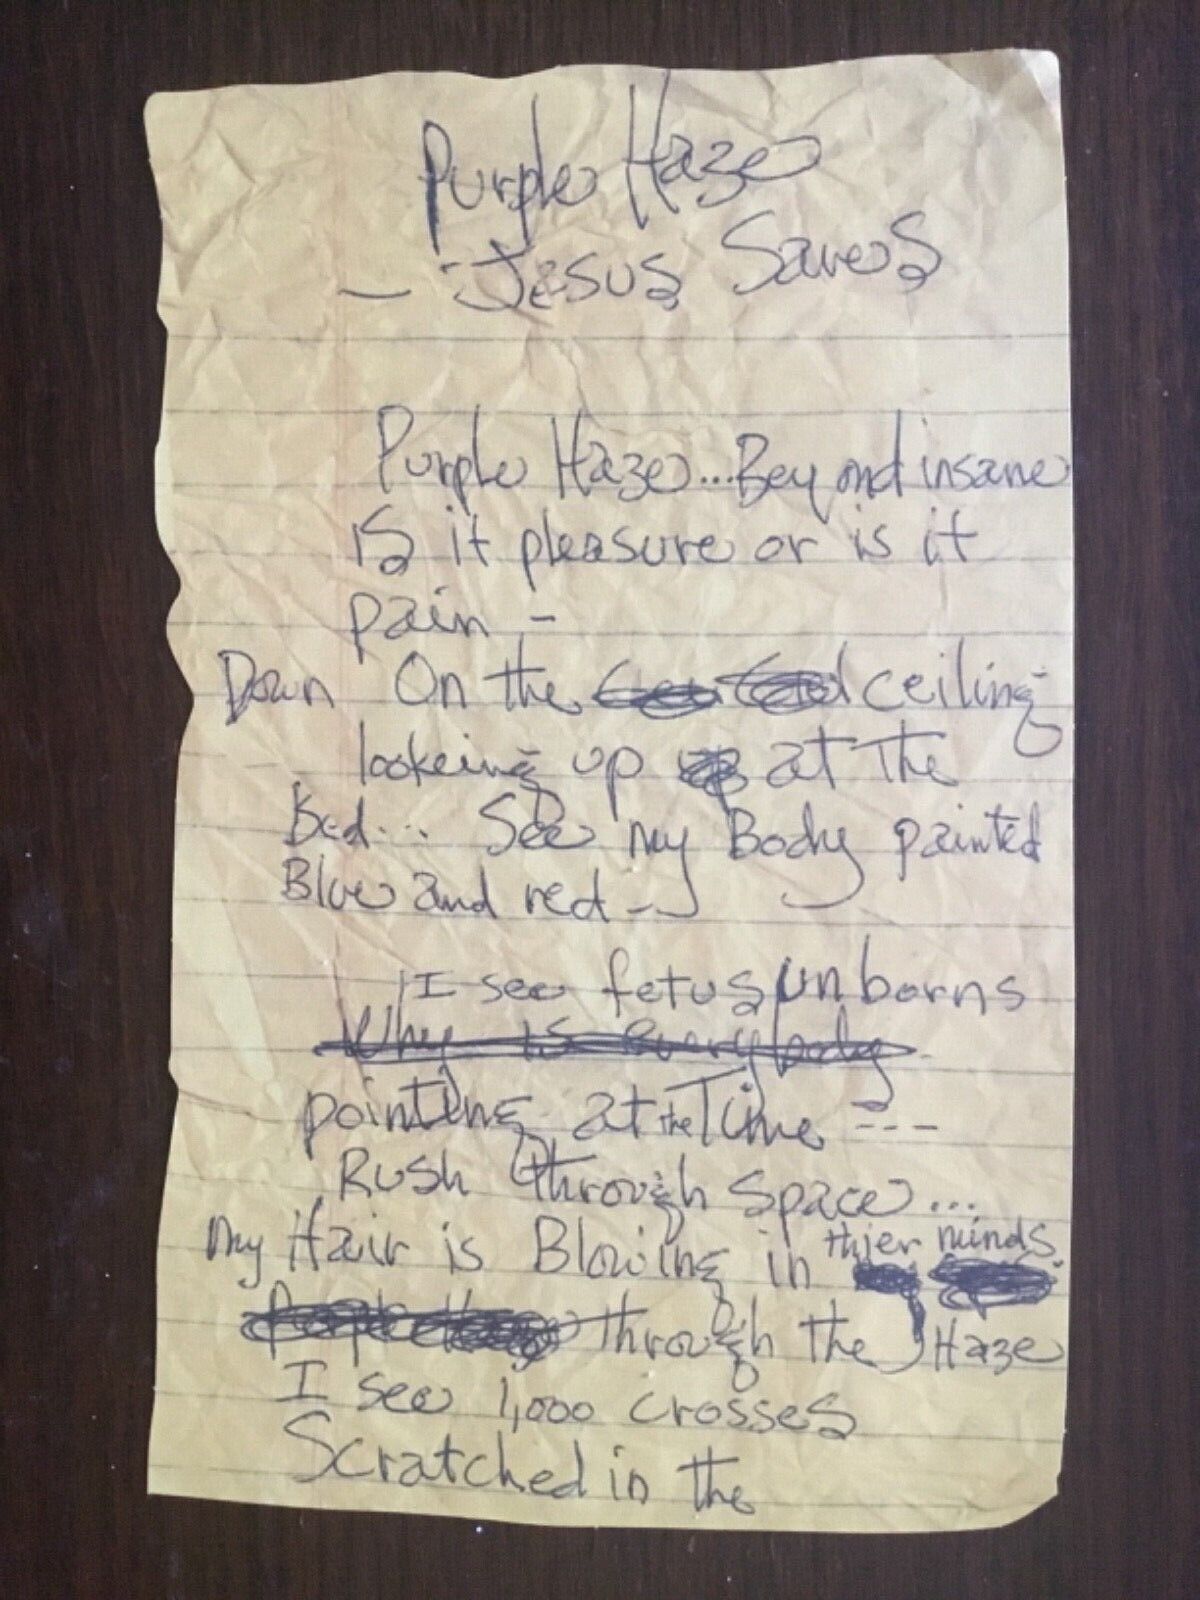 HAND WRITTEN NOTES BY JIMI HENDRIX FOR ‘PURPLE HAZE’ SONG *(Reproduction)*